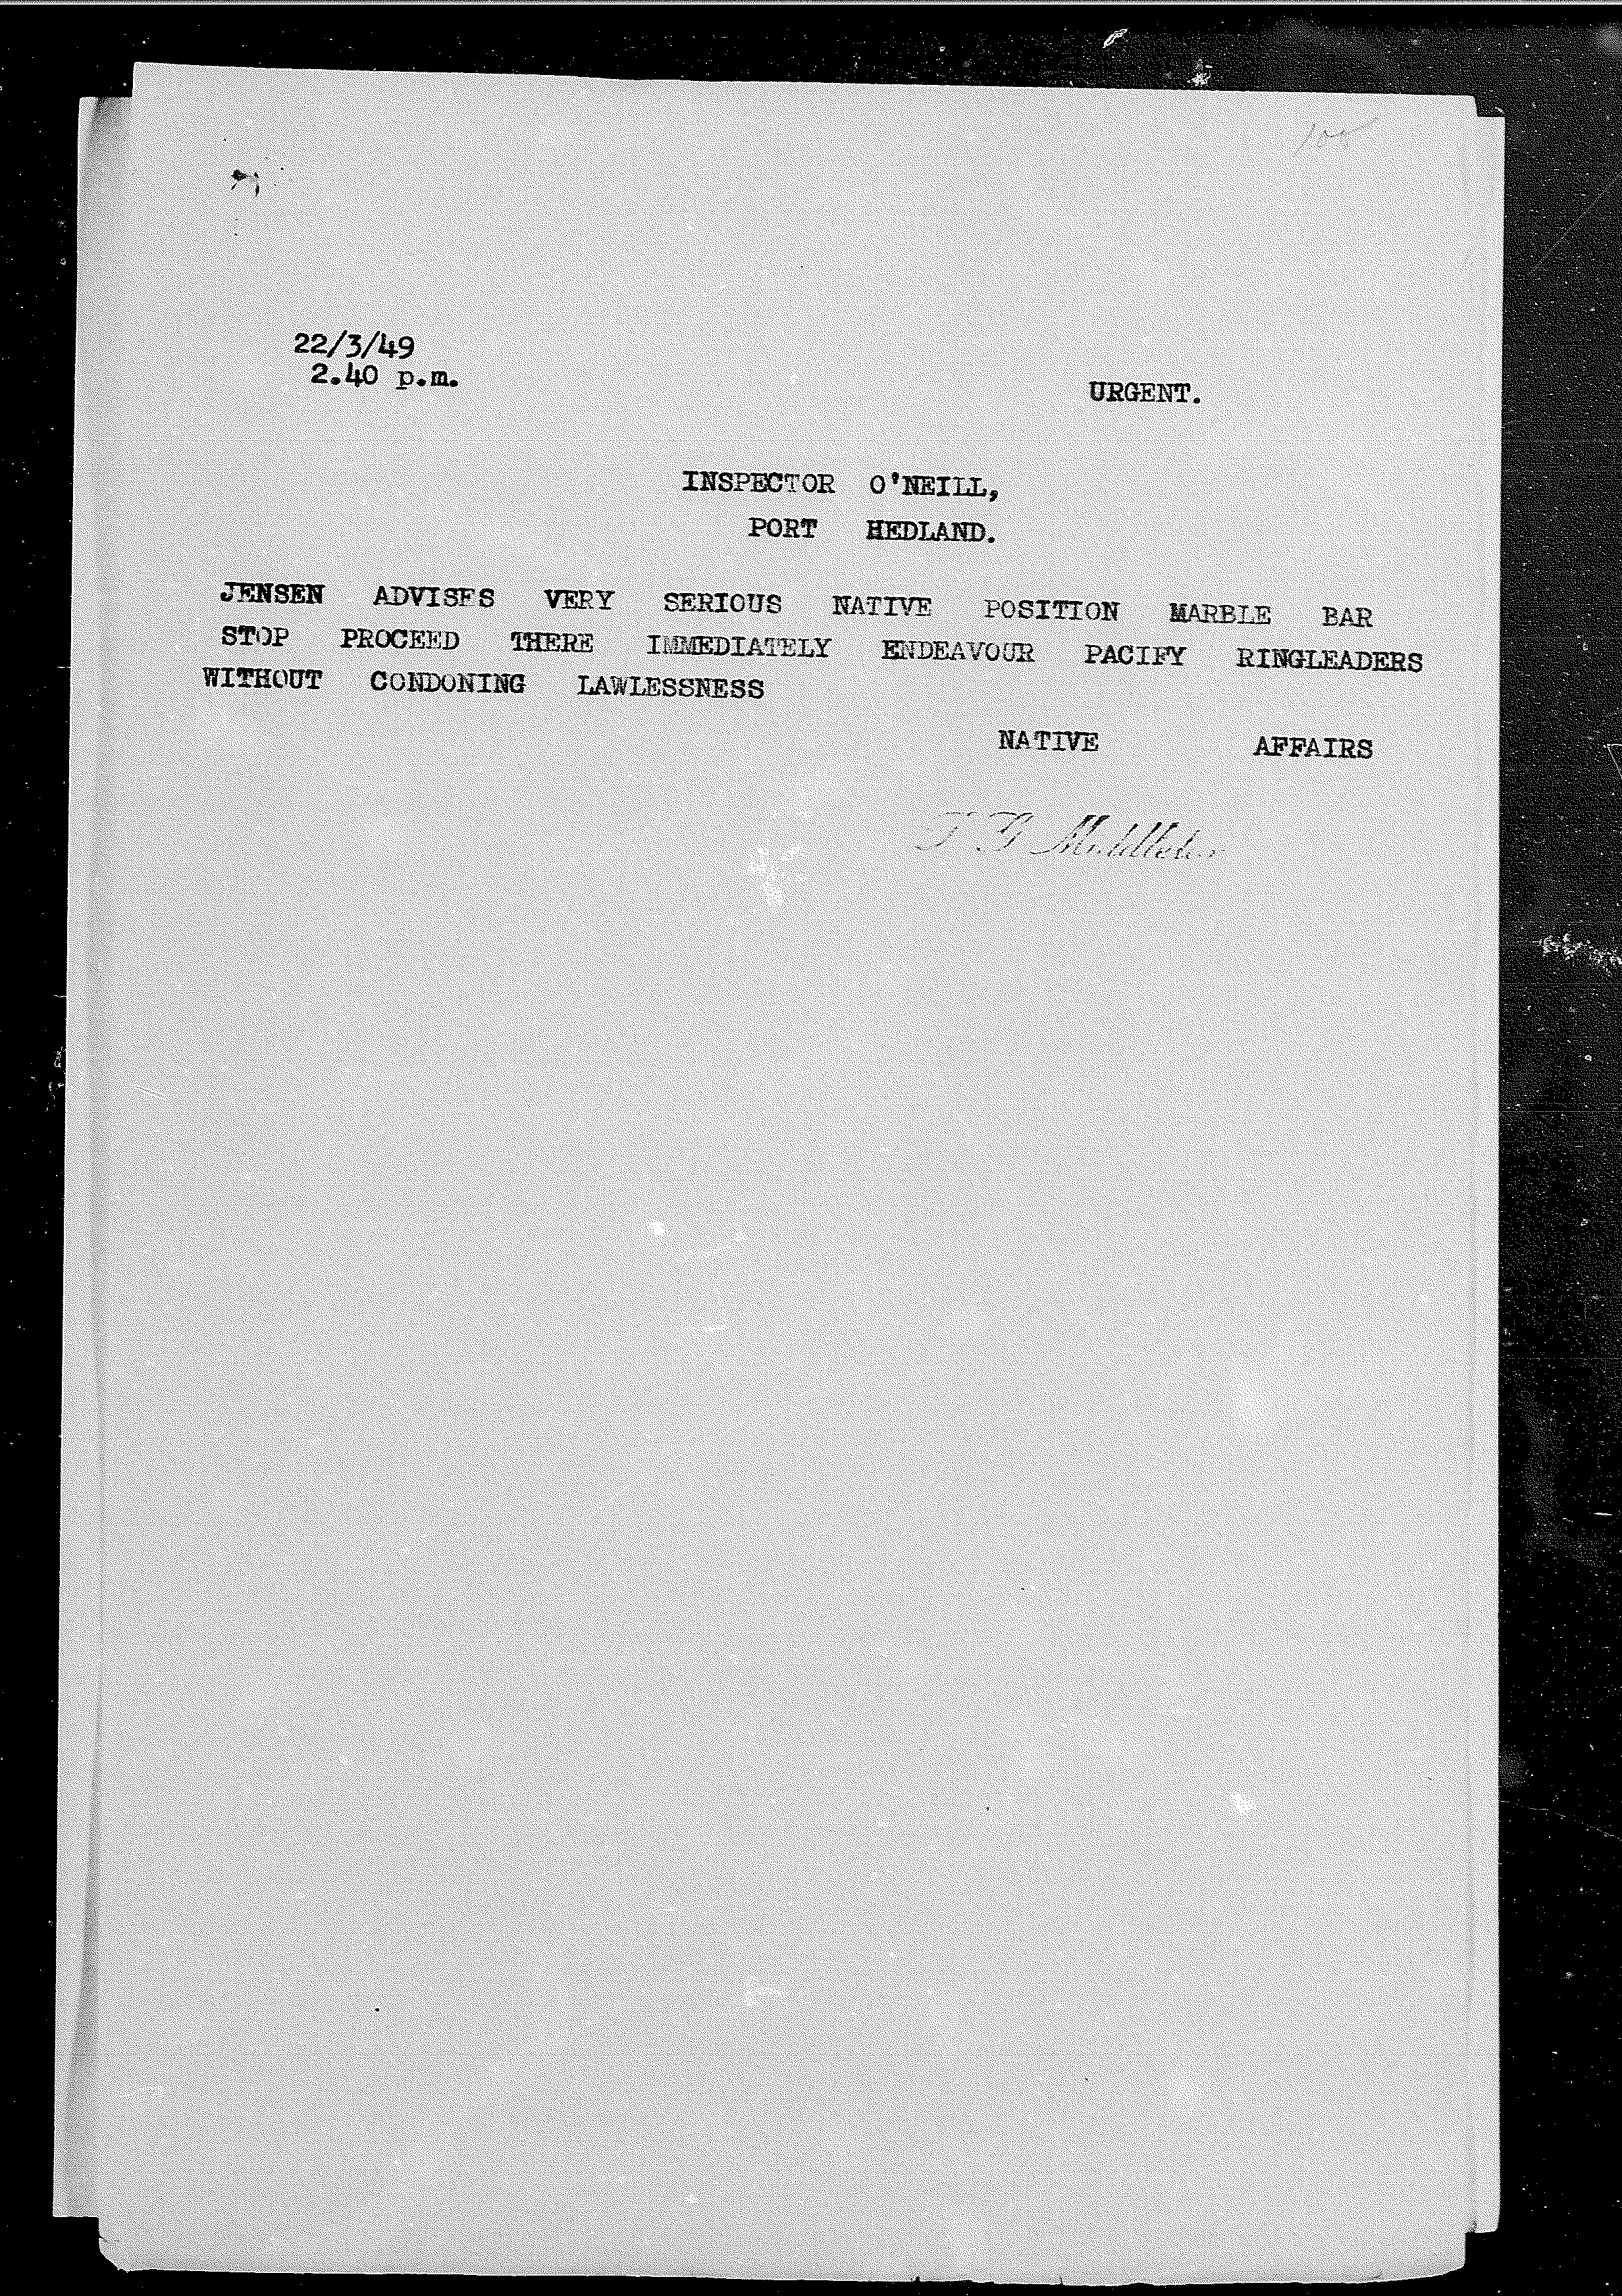 Middleton to O'Neill, 22 March 1949